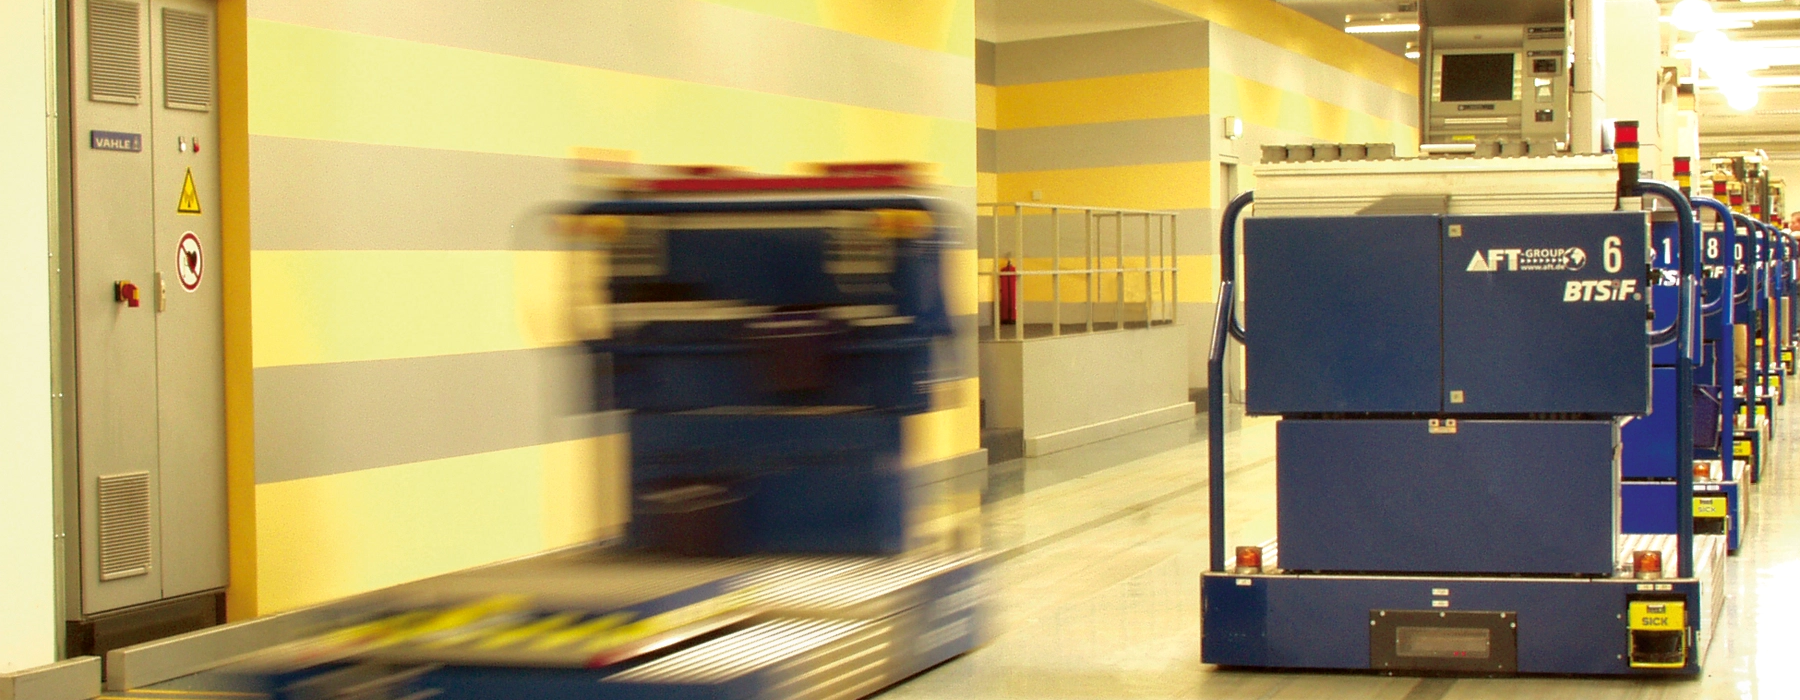 VAHLE Automated Guided Vehicle (AGV) Wincor Nixdorf from Automotive and Intralogistics